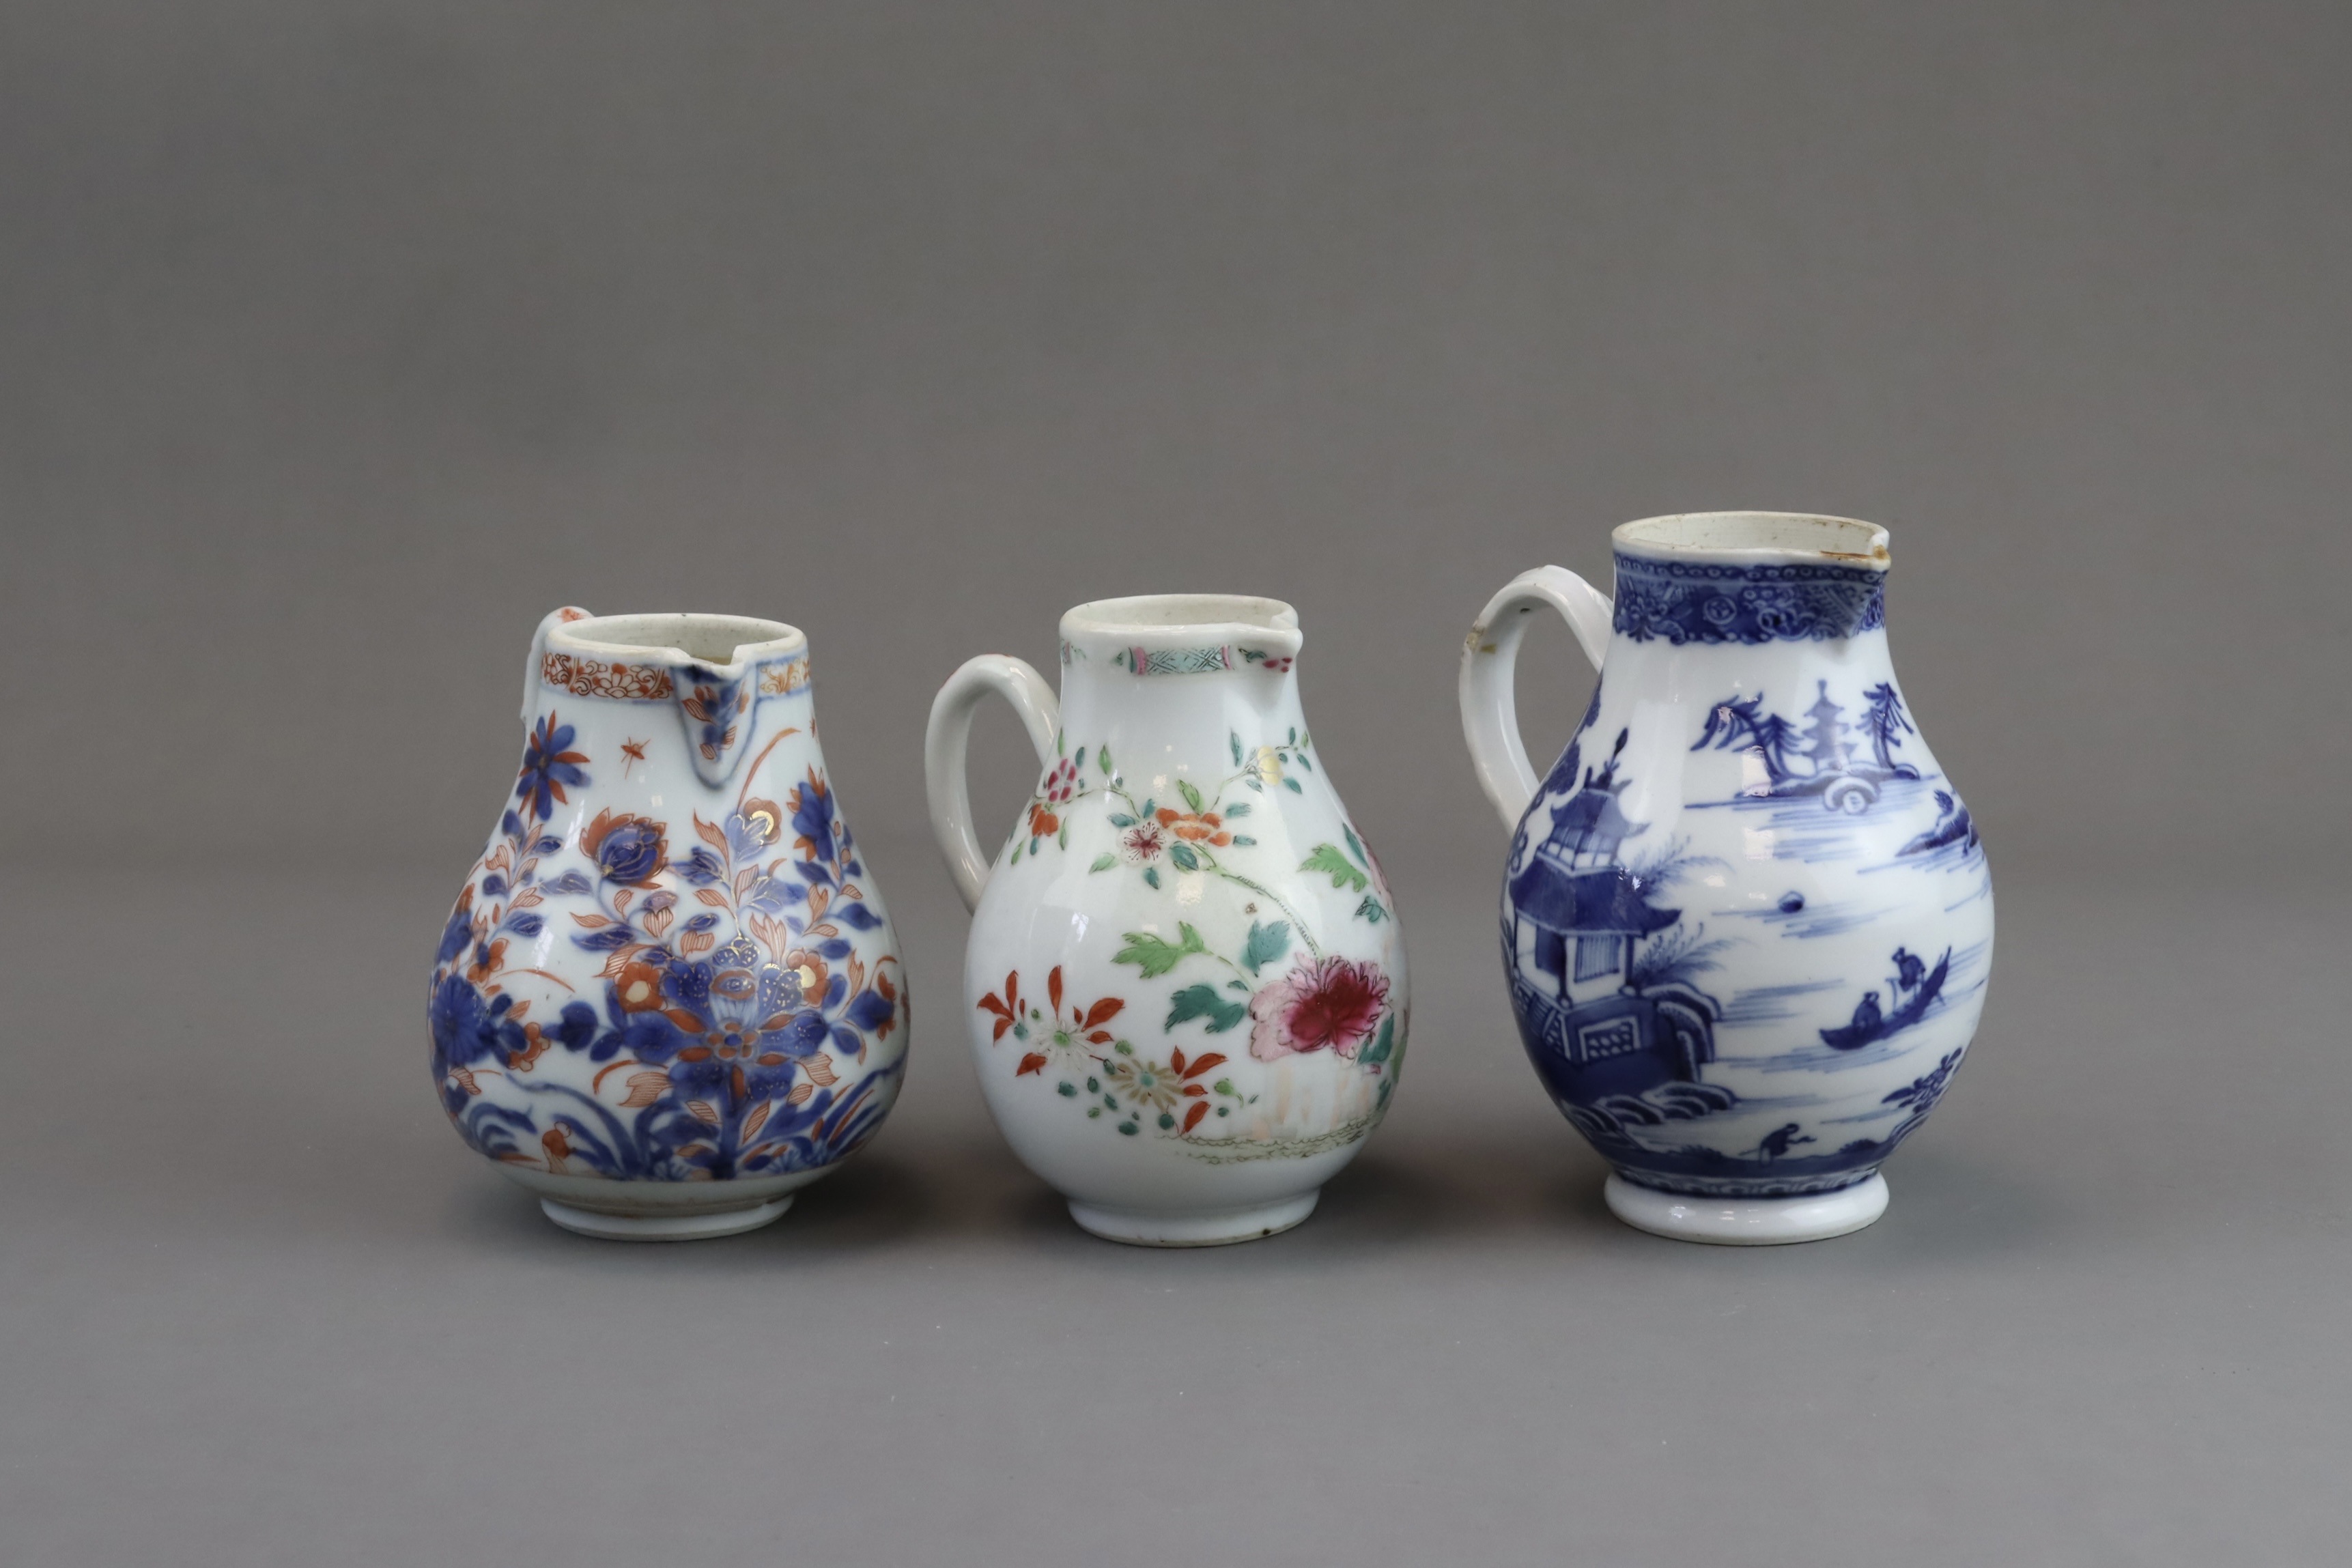 Three Blue and White and 'famille rose' Milk Jugs, 18th century - Image 6 of 10